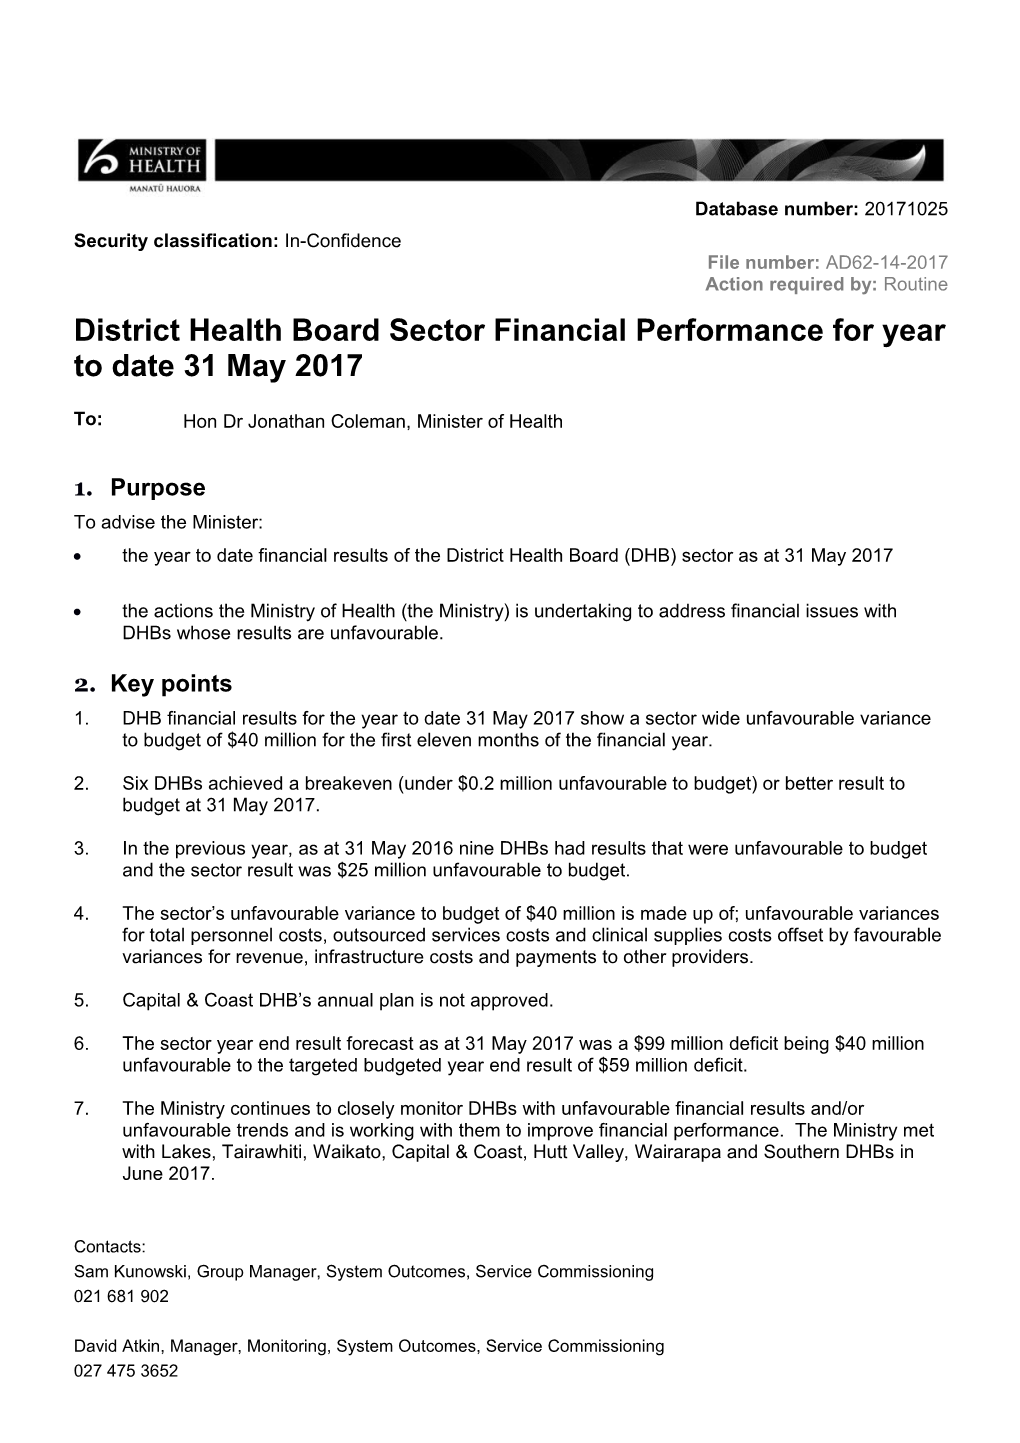 District Health Board Sector Financial Performance for Year to Date 31 May2017